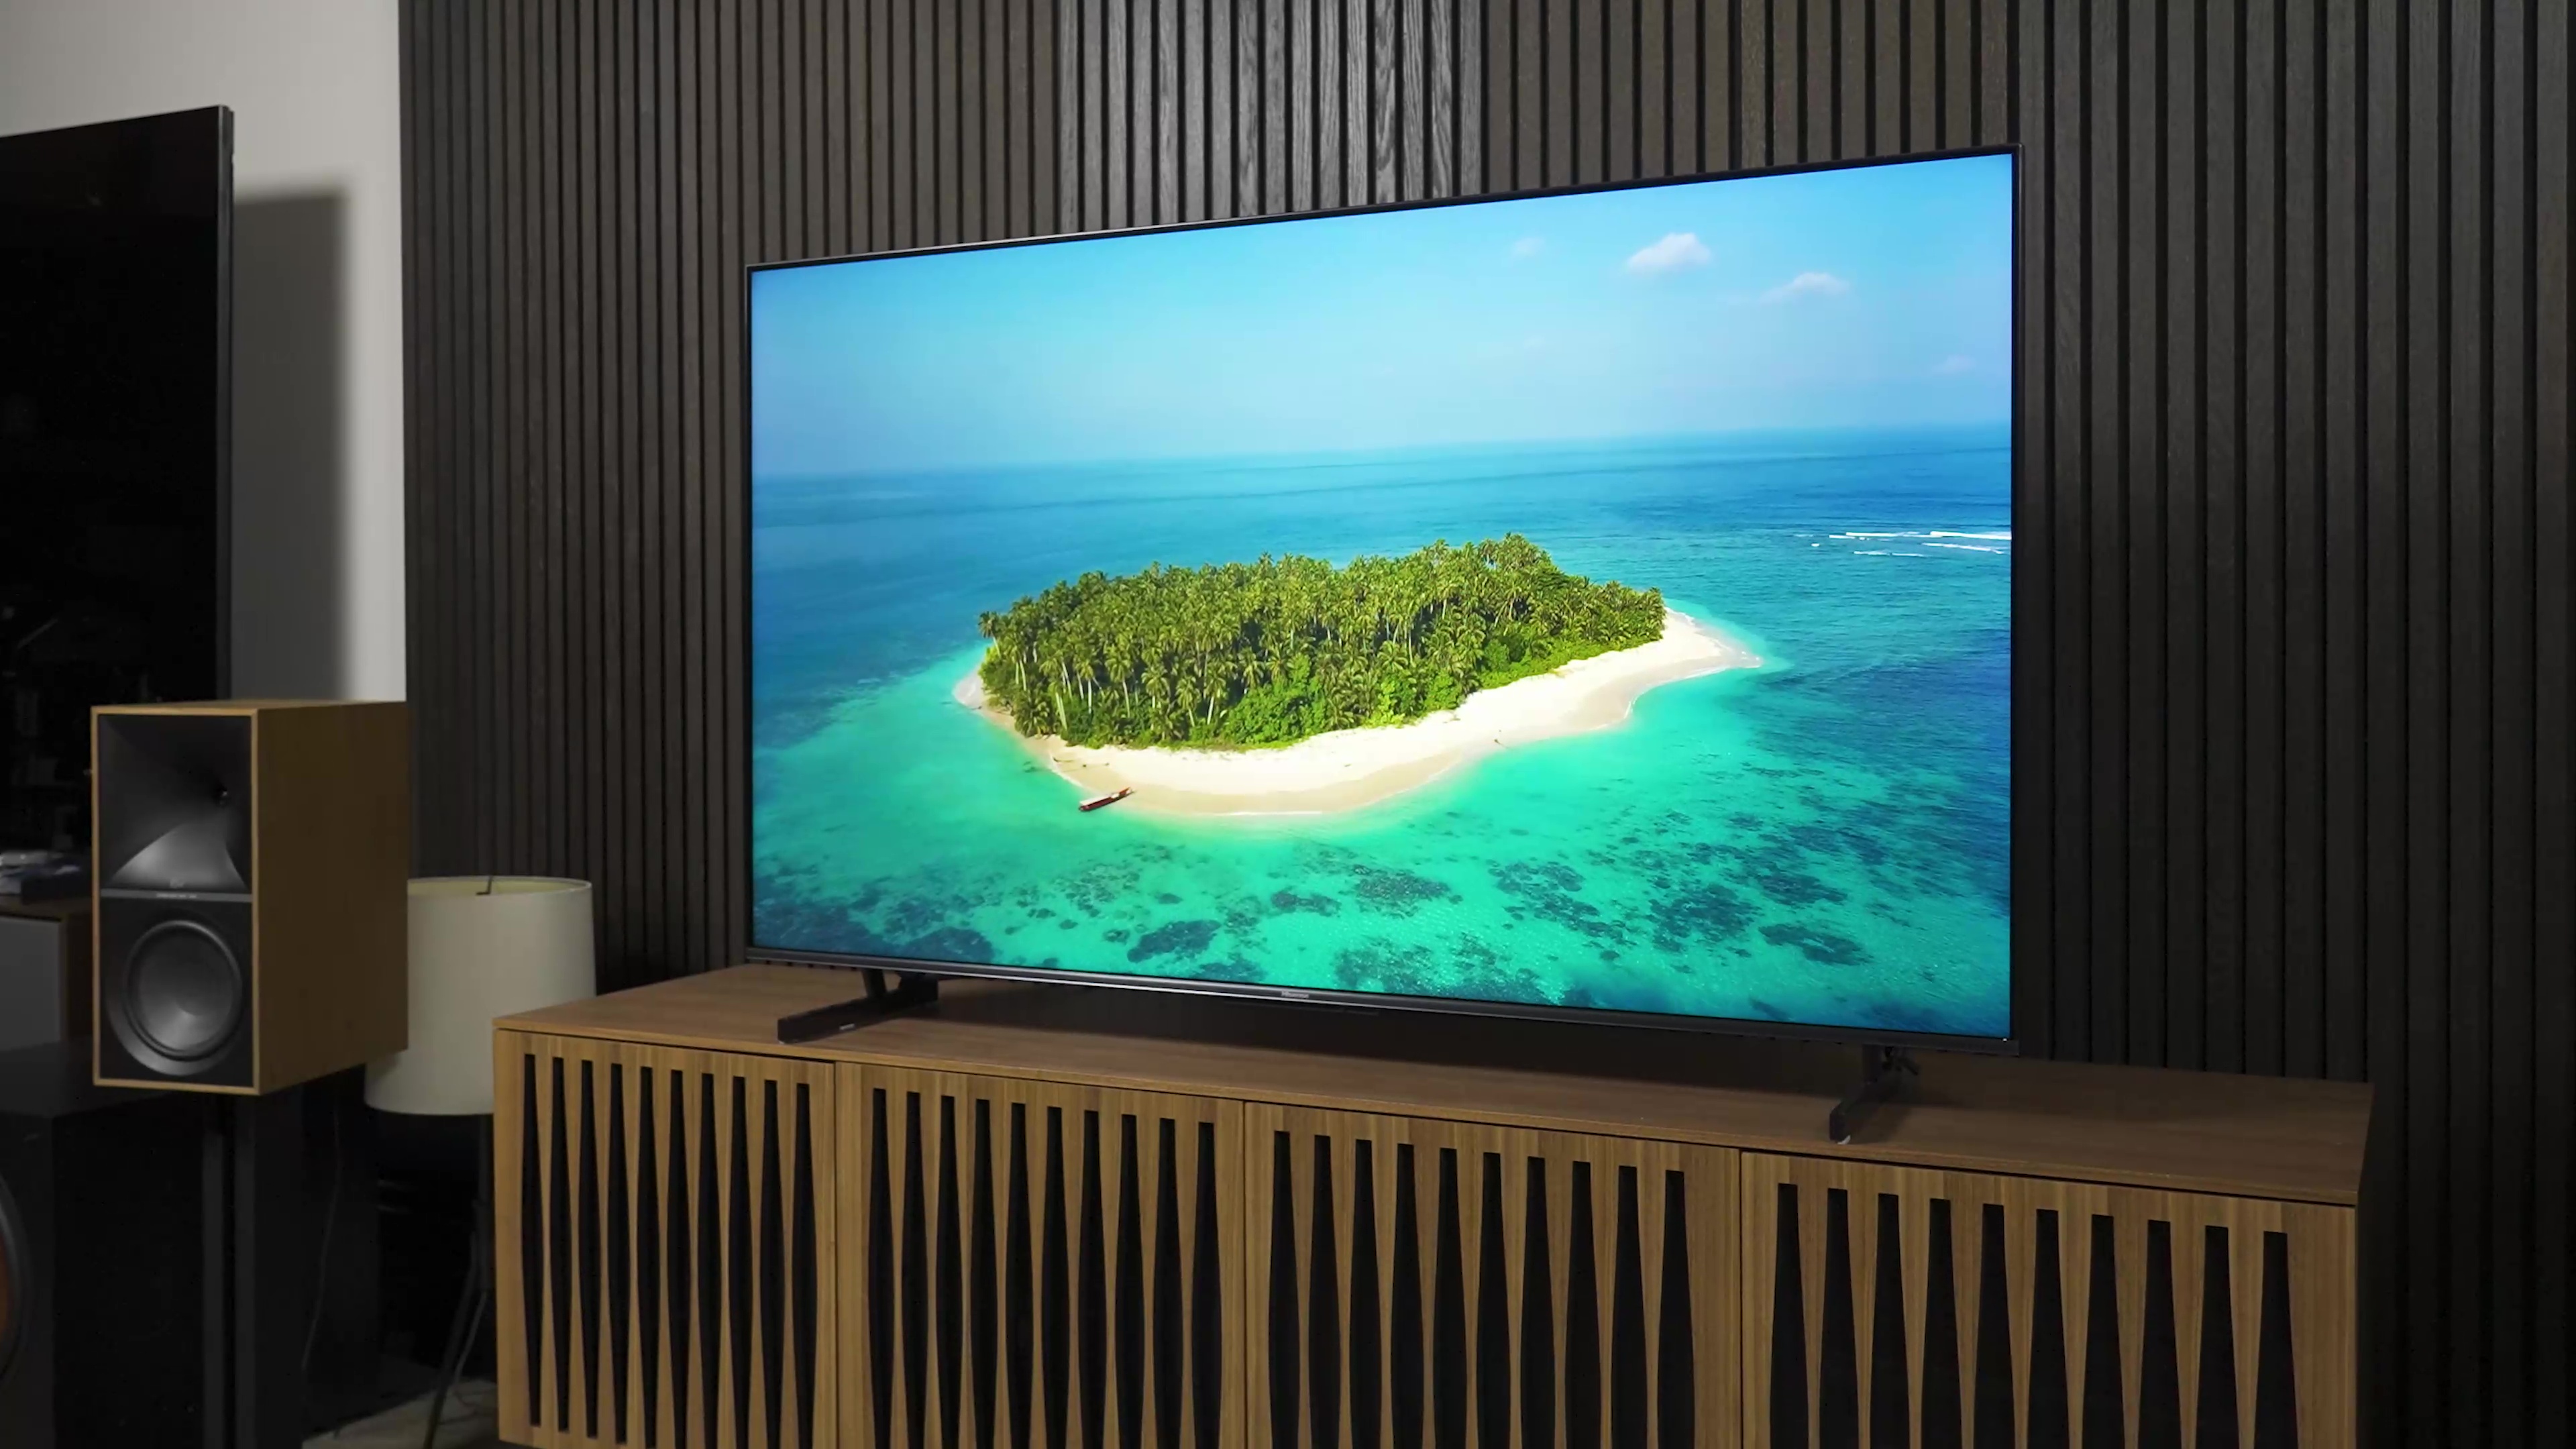 Hisense U7K 4K TV Review: an Affordable QLED Perfect for Movies and Gaming